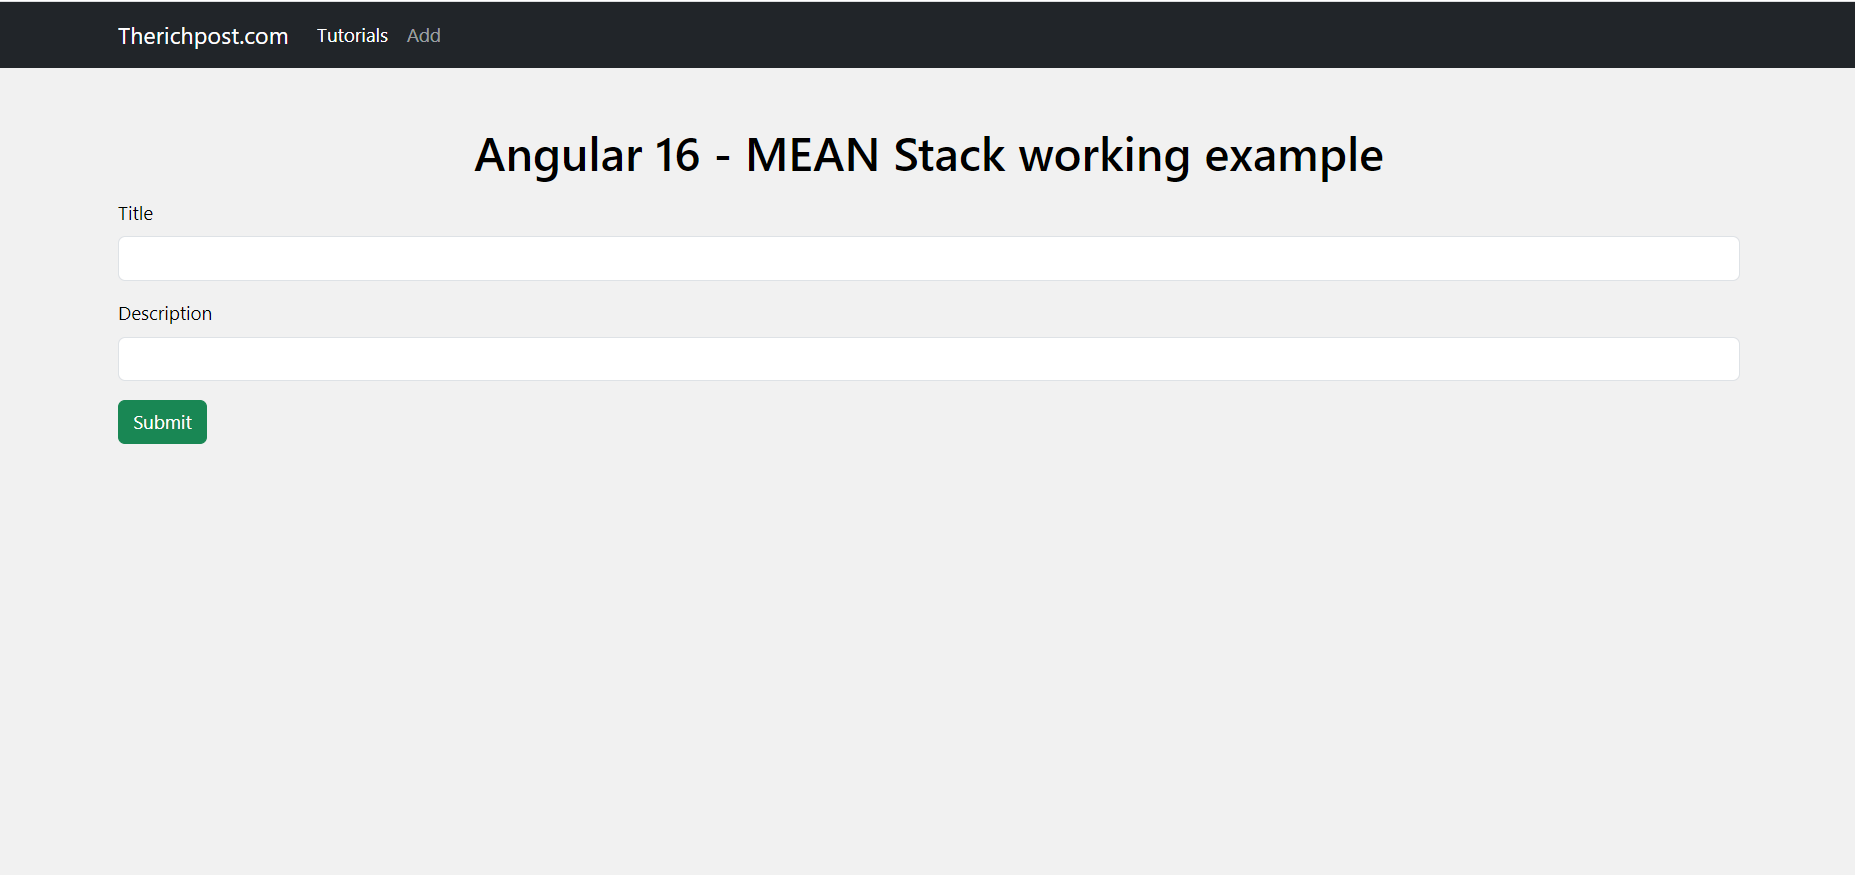 Angular 16 MEAN Stack working example